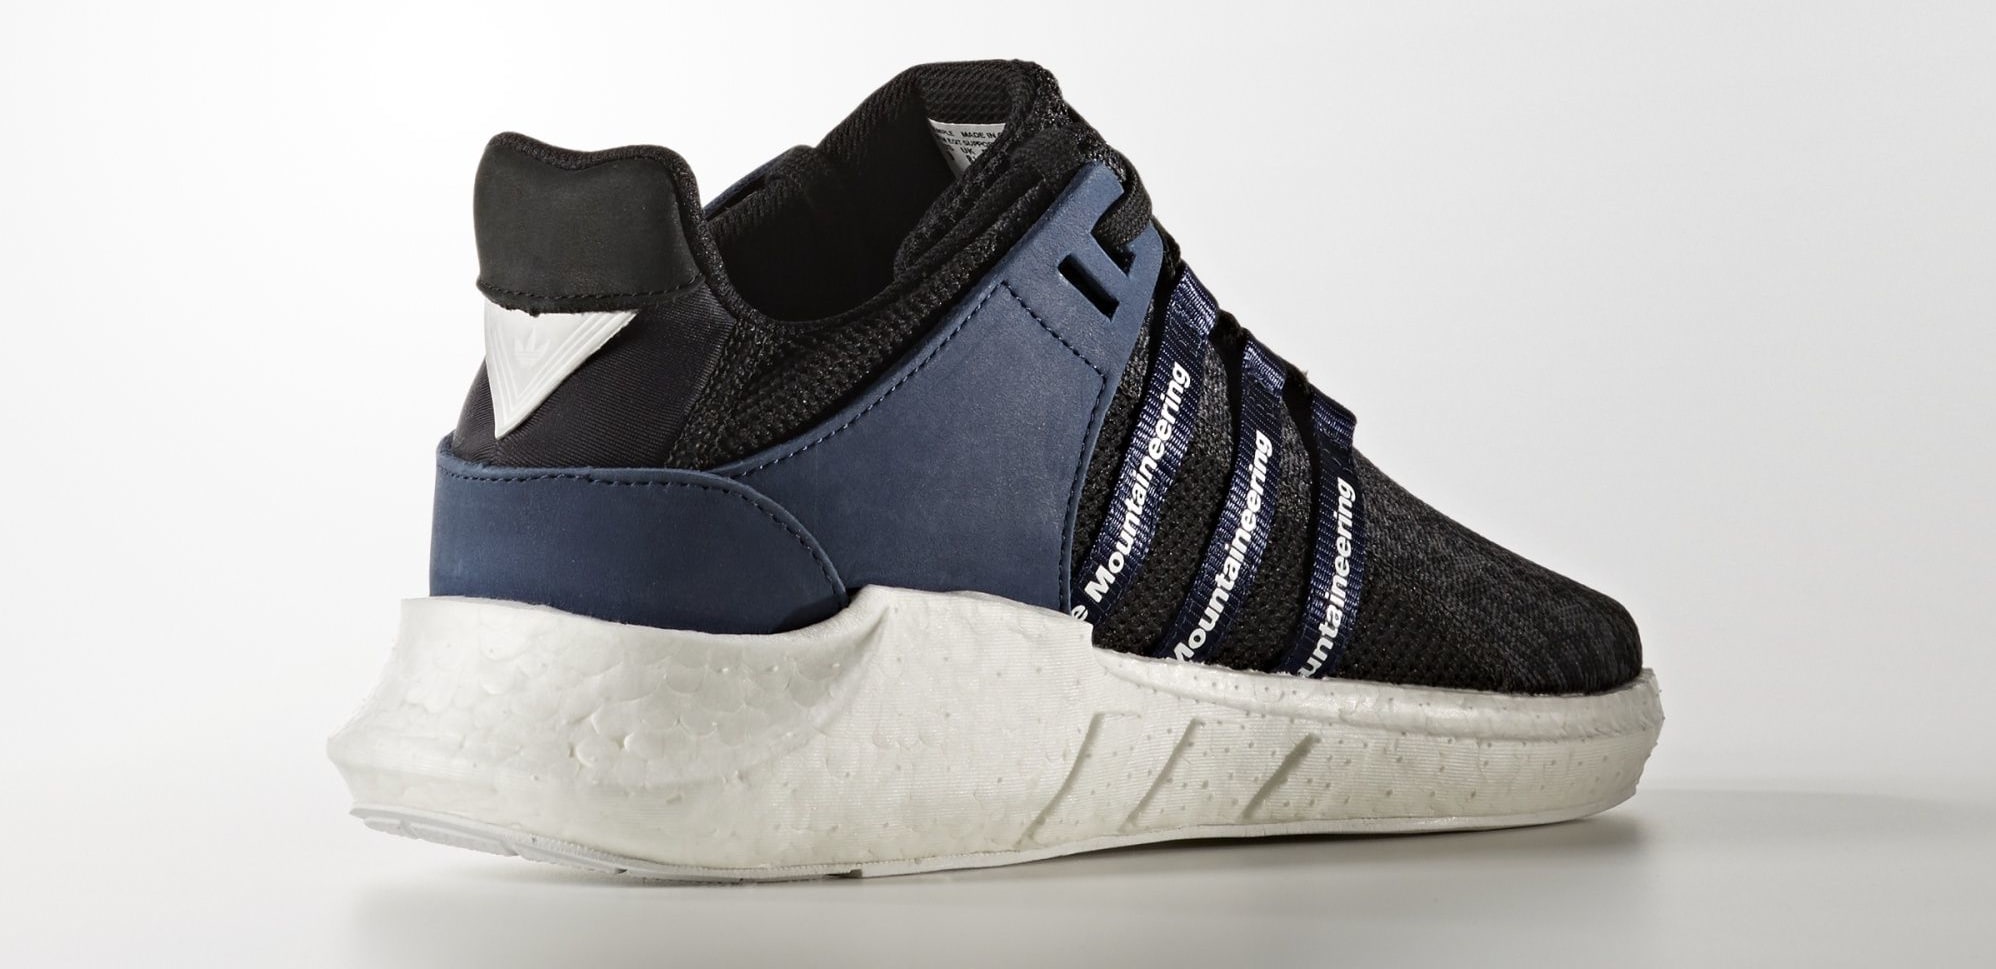 White Mountaineering x Adidas EQT Support 93-17 heel